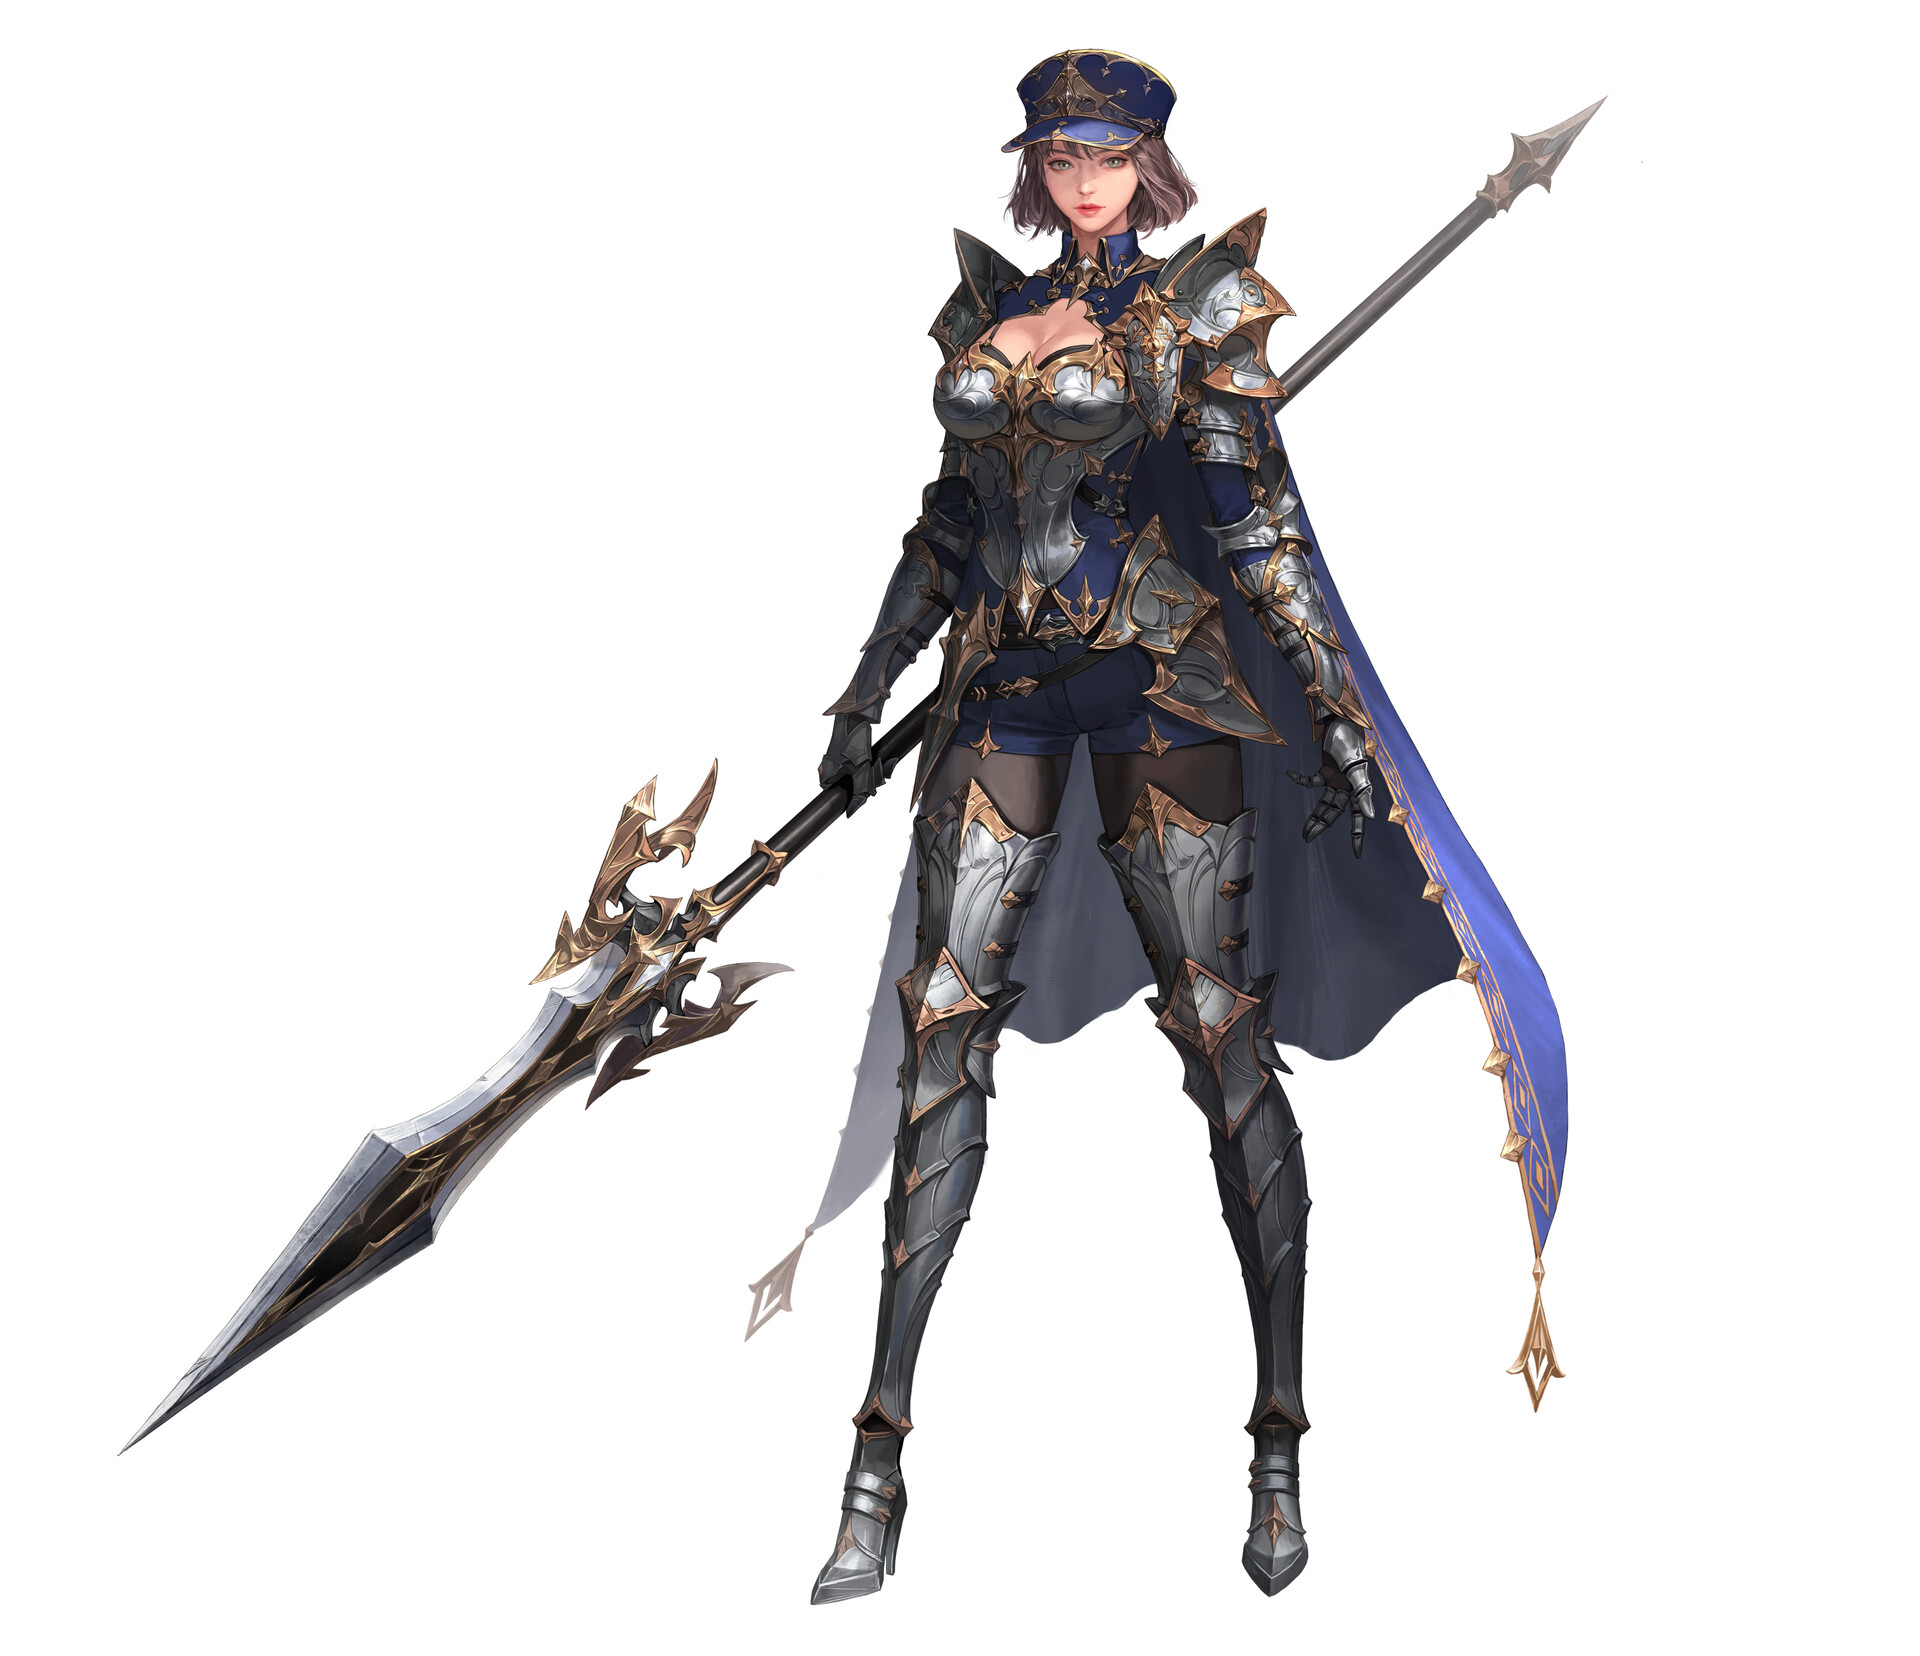 General 1920x1656 Minsook An drawing warrior weapon lance armor cape soldier short hair white background simple background